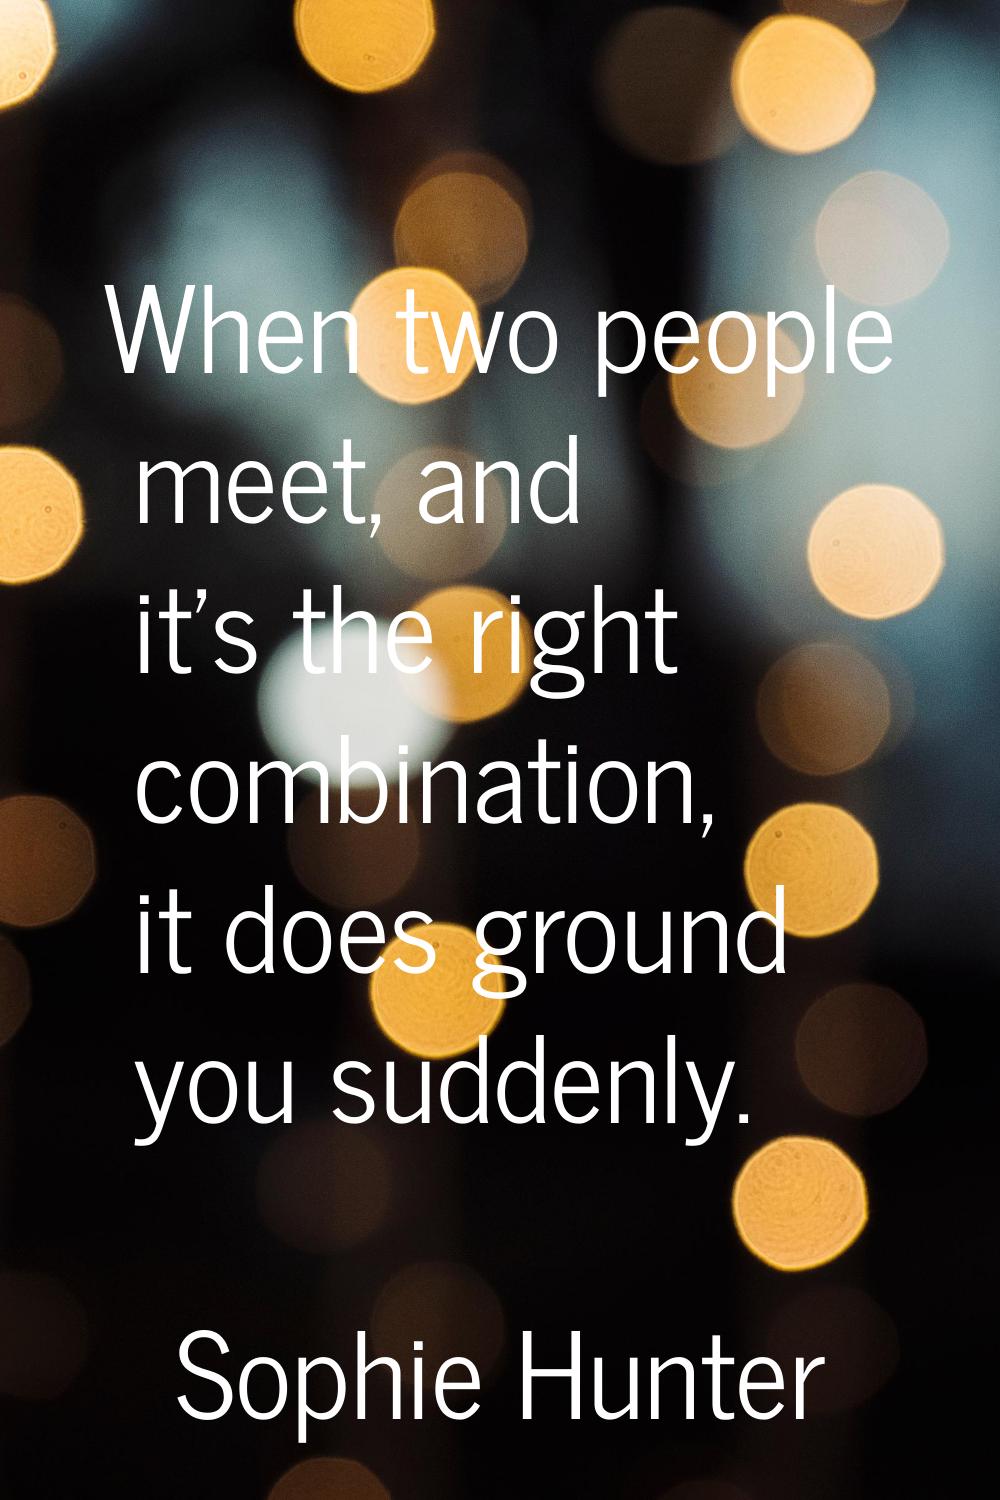 When two people meet, and it's the right combination, it does ground you suddenly.